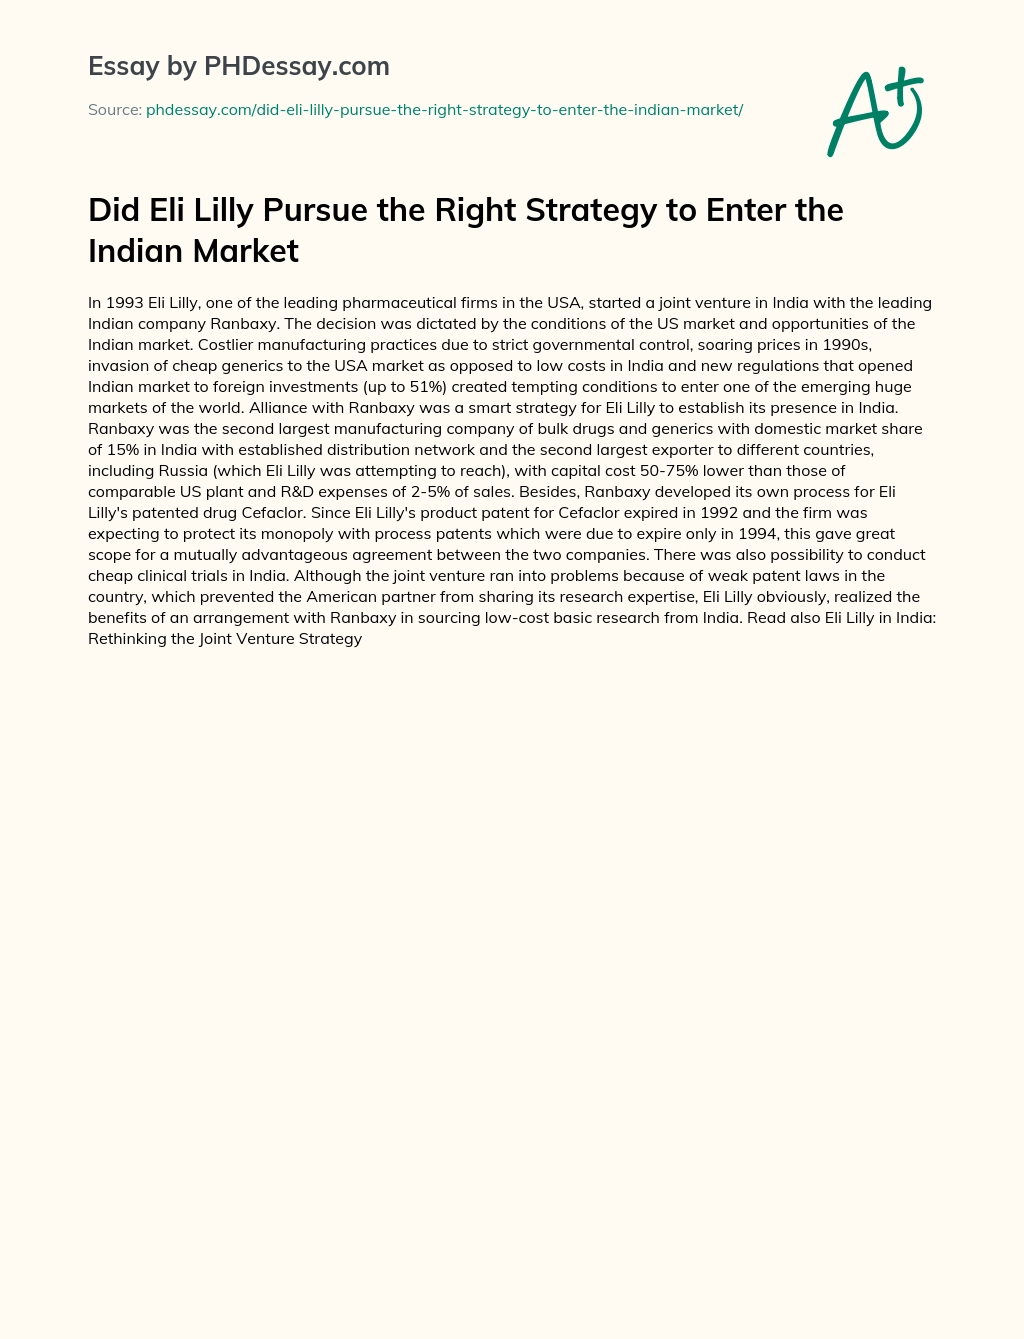 Did Eli Lilly Pursue the Right Strategy to Enter the Indian Market essay